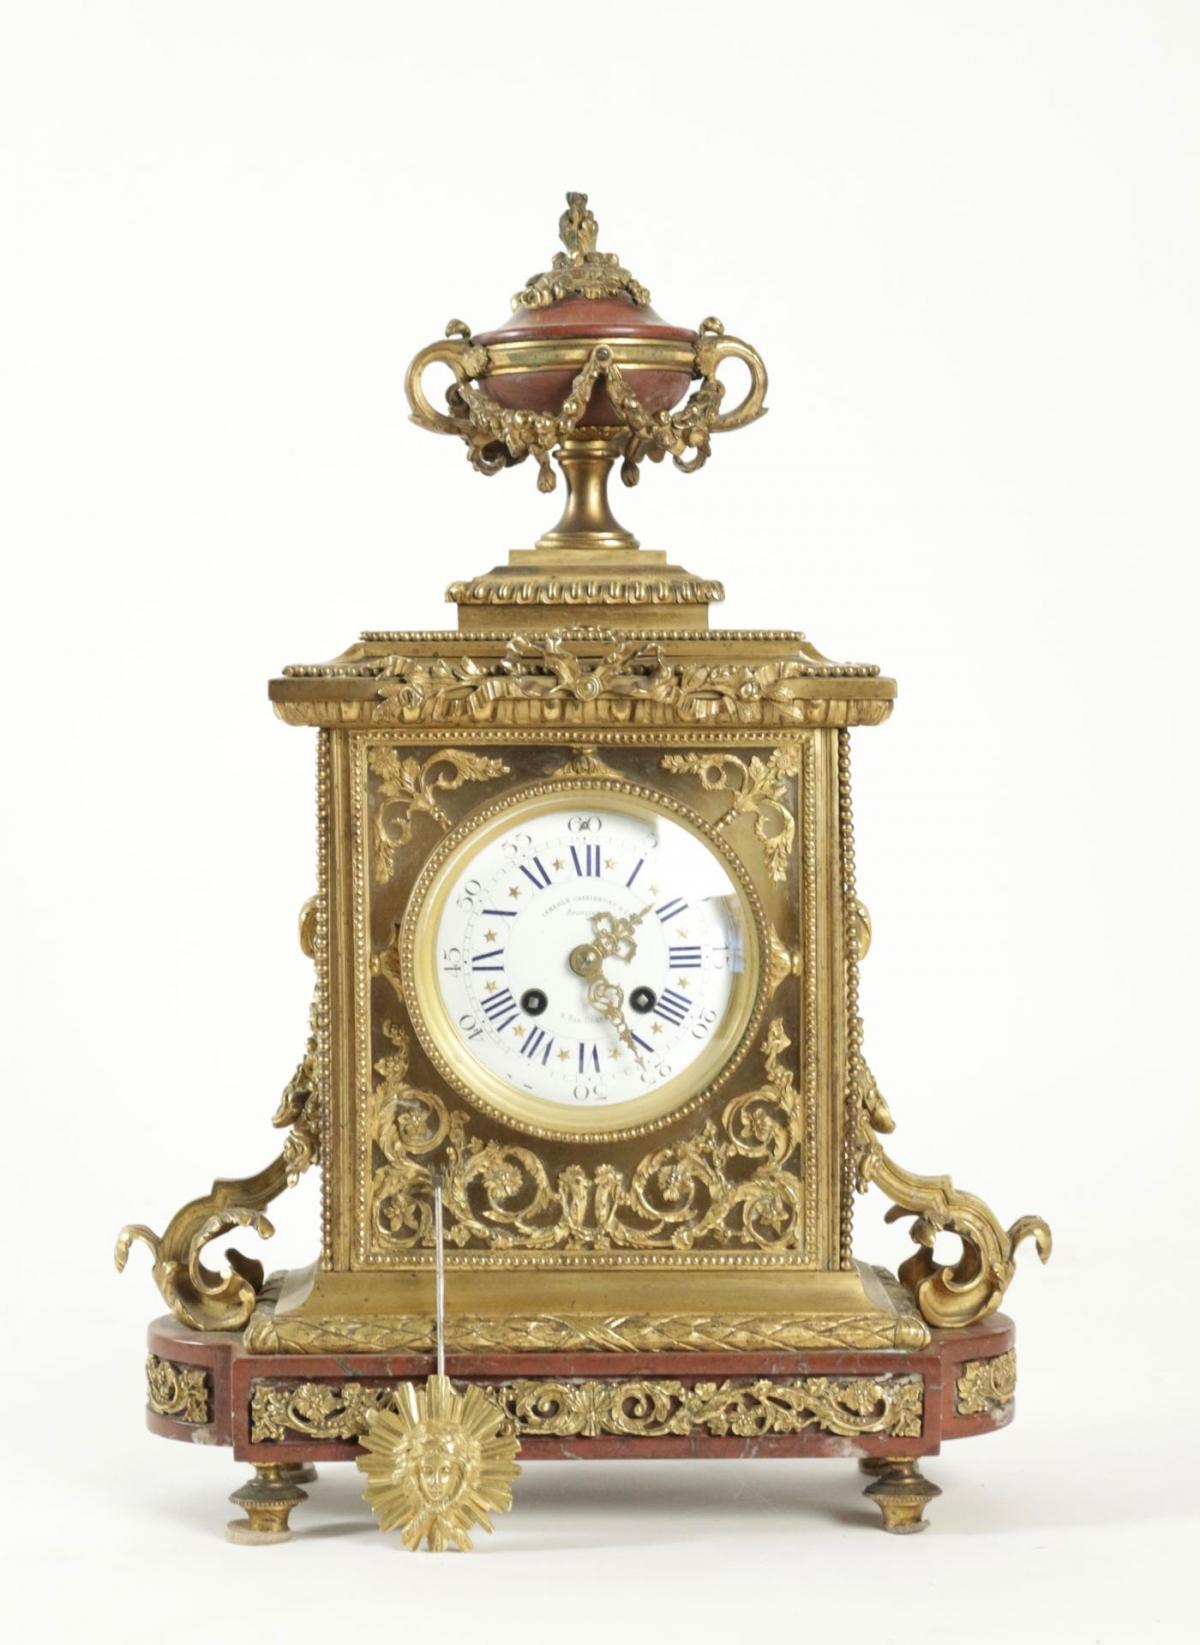 Three-piece trim
Pair of 4-light candelabra and pendulum clock
19th century, Napoleon III period
Gilt bronze, Griote marble, glass and enamel dial
Lemerle-Charpentier & CO, Bronziers, 8 rue Charlot
Measures: 33*12*47cm.